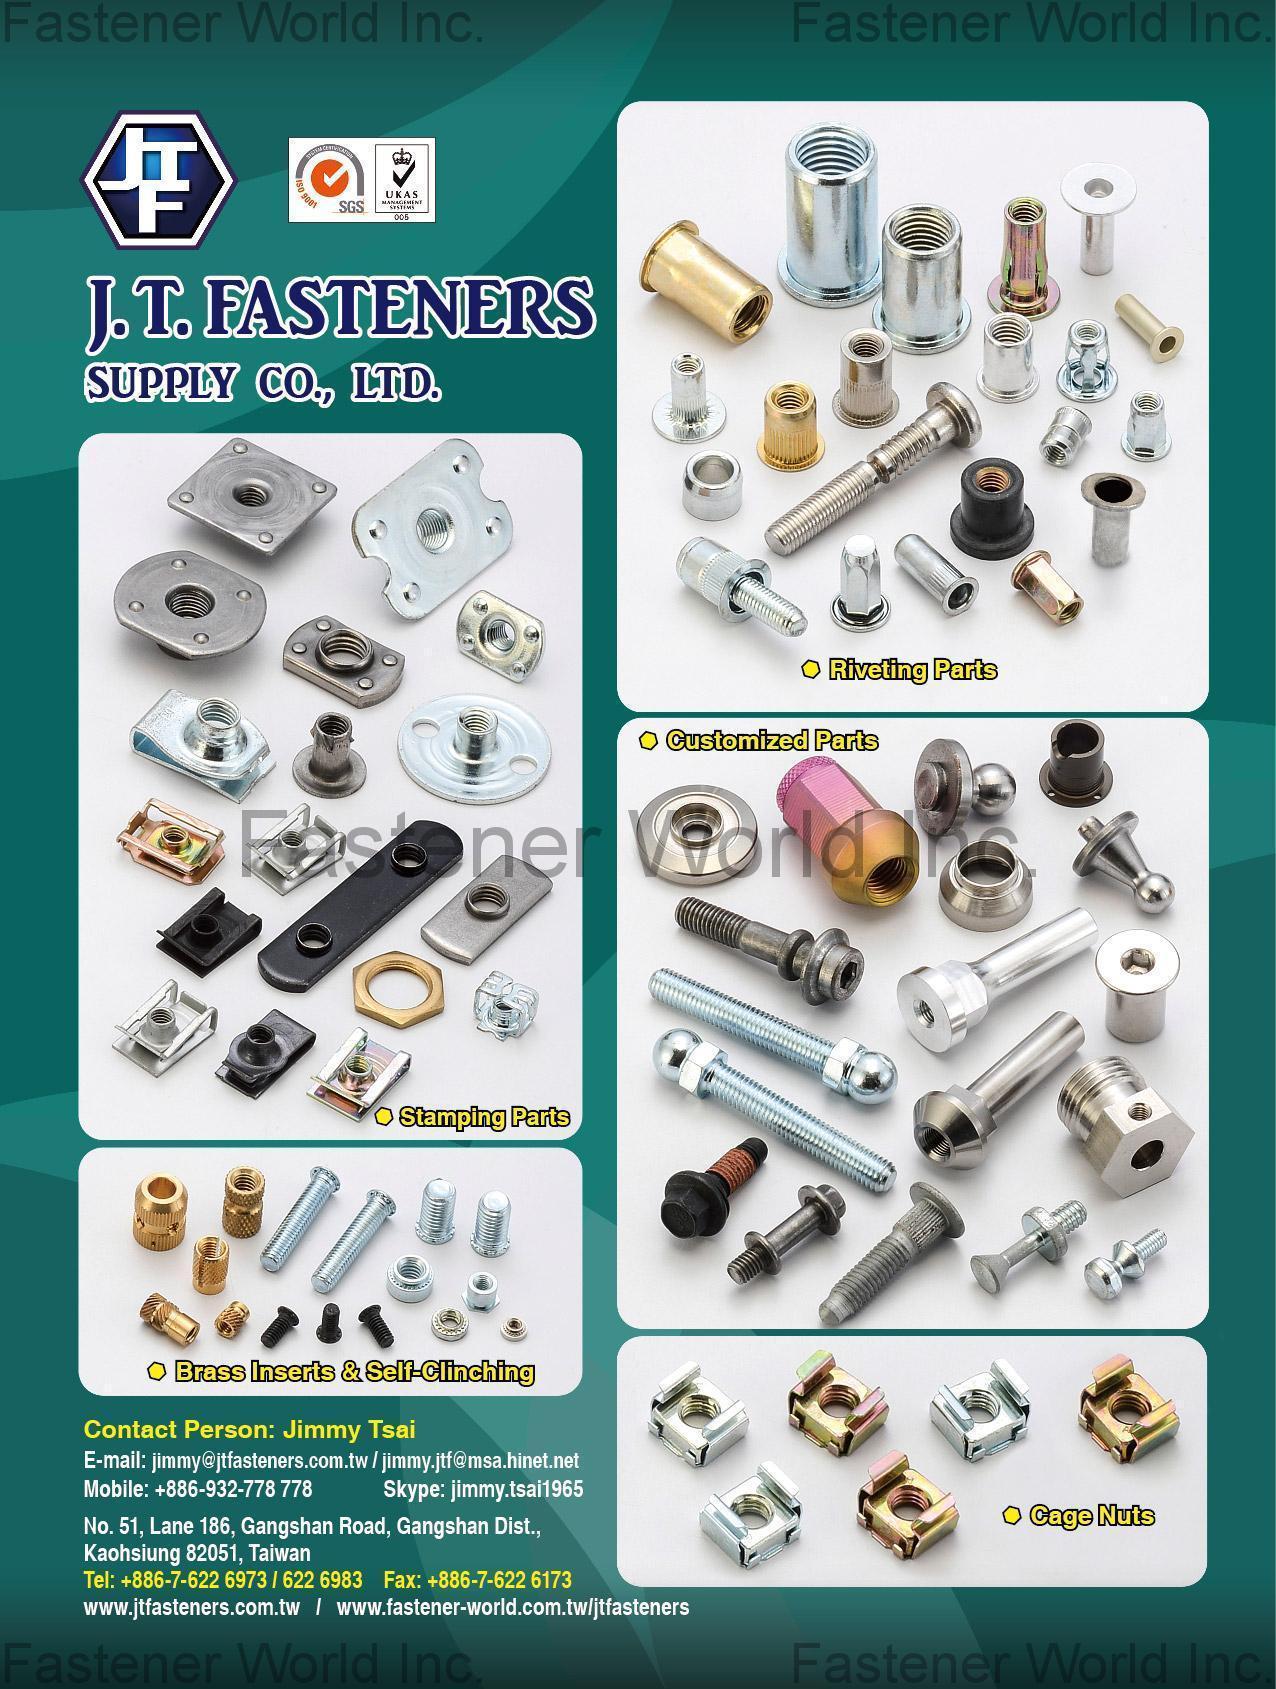 J. T. FASTENERS SUPPLY CO., LTD.  , Stamping Parts, Brass Inserts & Self-Clinching, Riveting Parts, Customized Parts, Cage Nuts , Stamped Parts